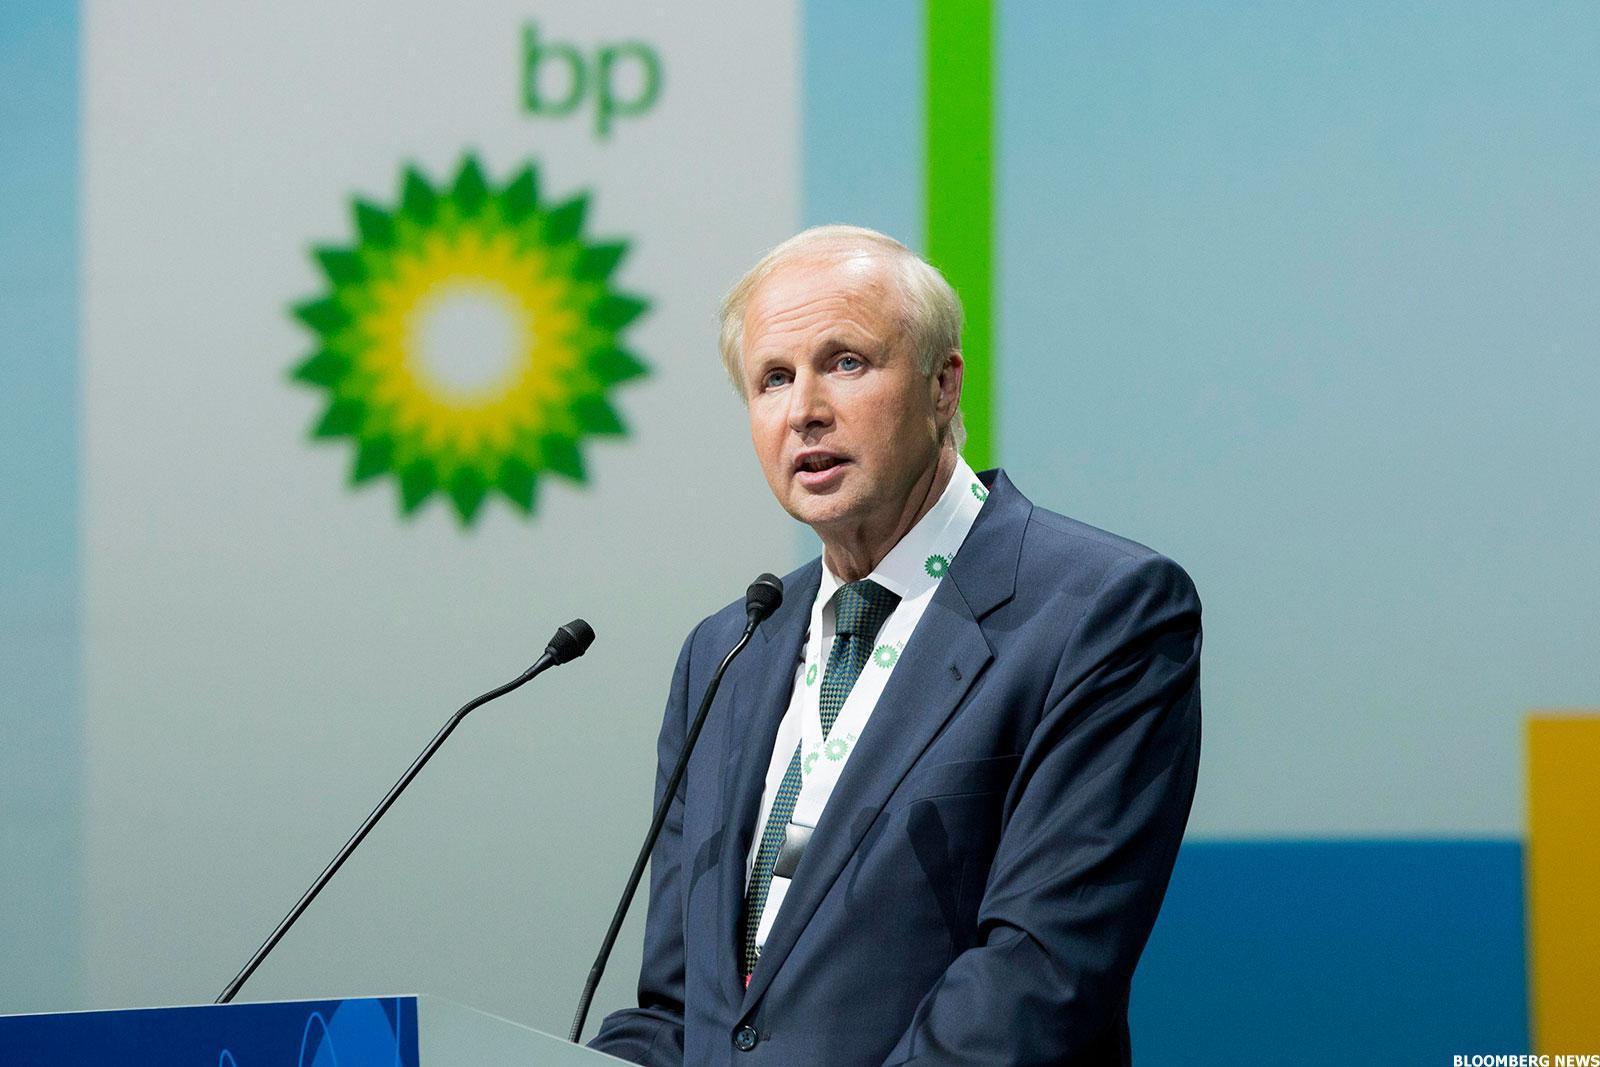 Responding to a shareholder revolt over lofty compensation, BP said that Mr Dudley’s total pay for 2016 would be $11.4m compared to the $19.4m he got for 2015